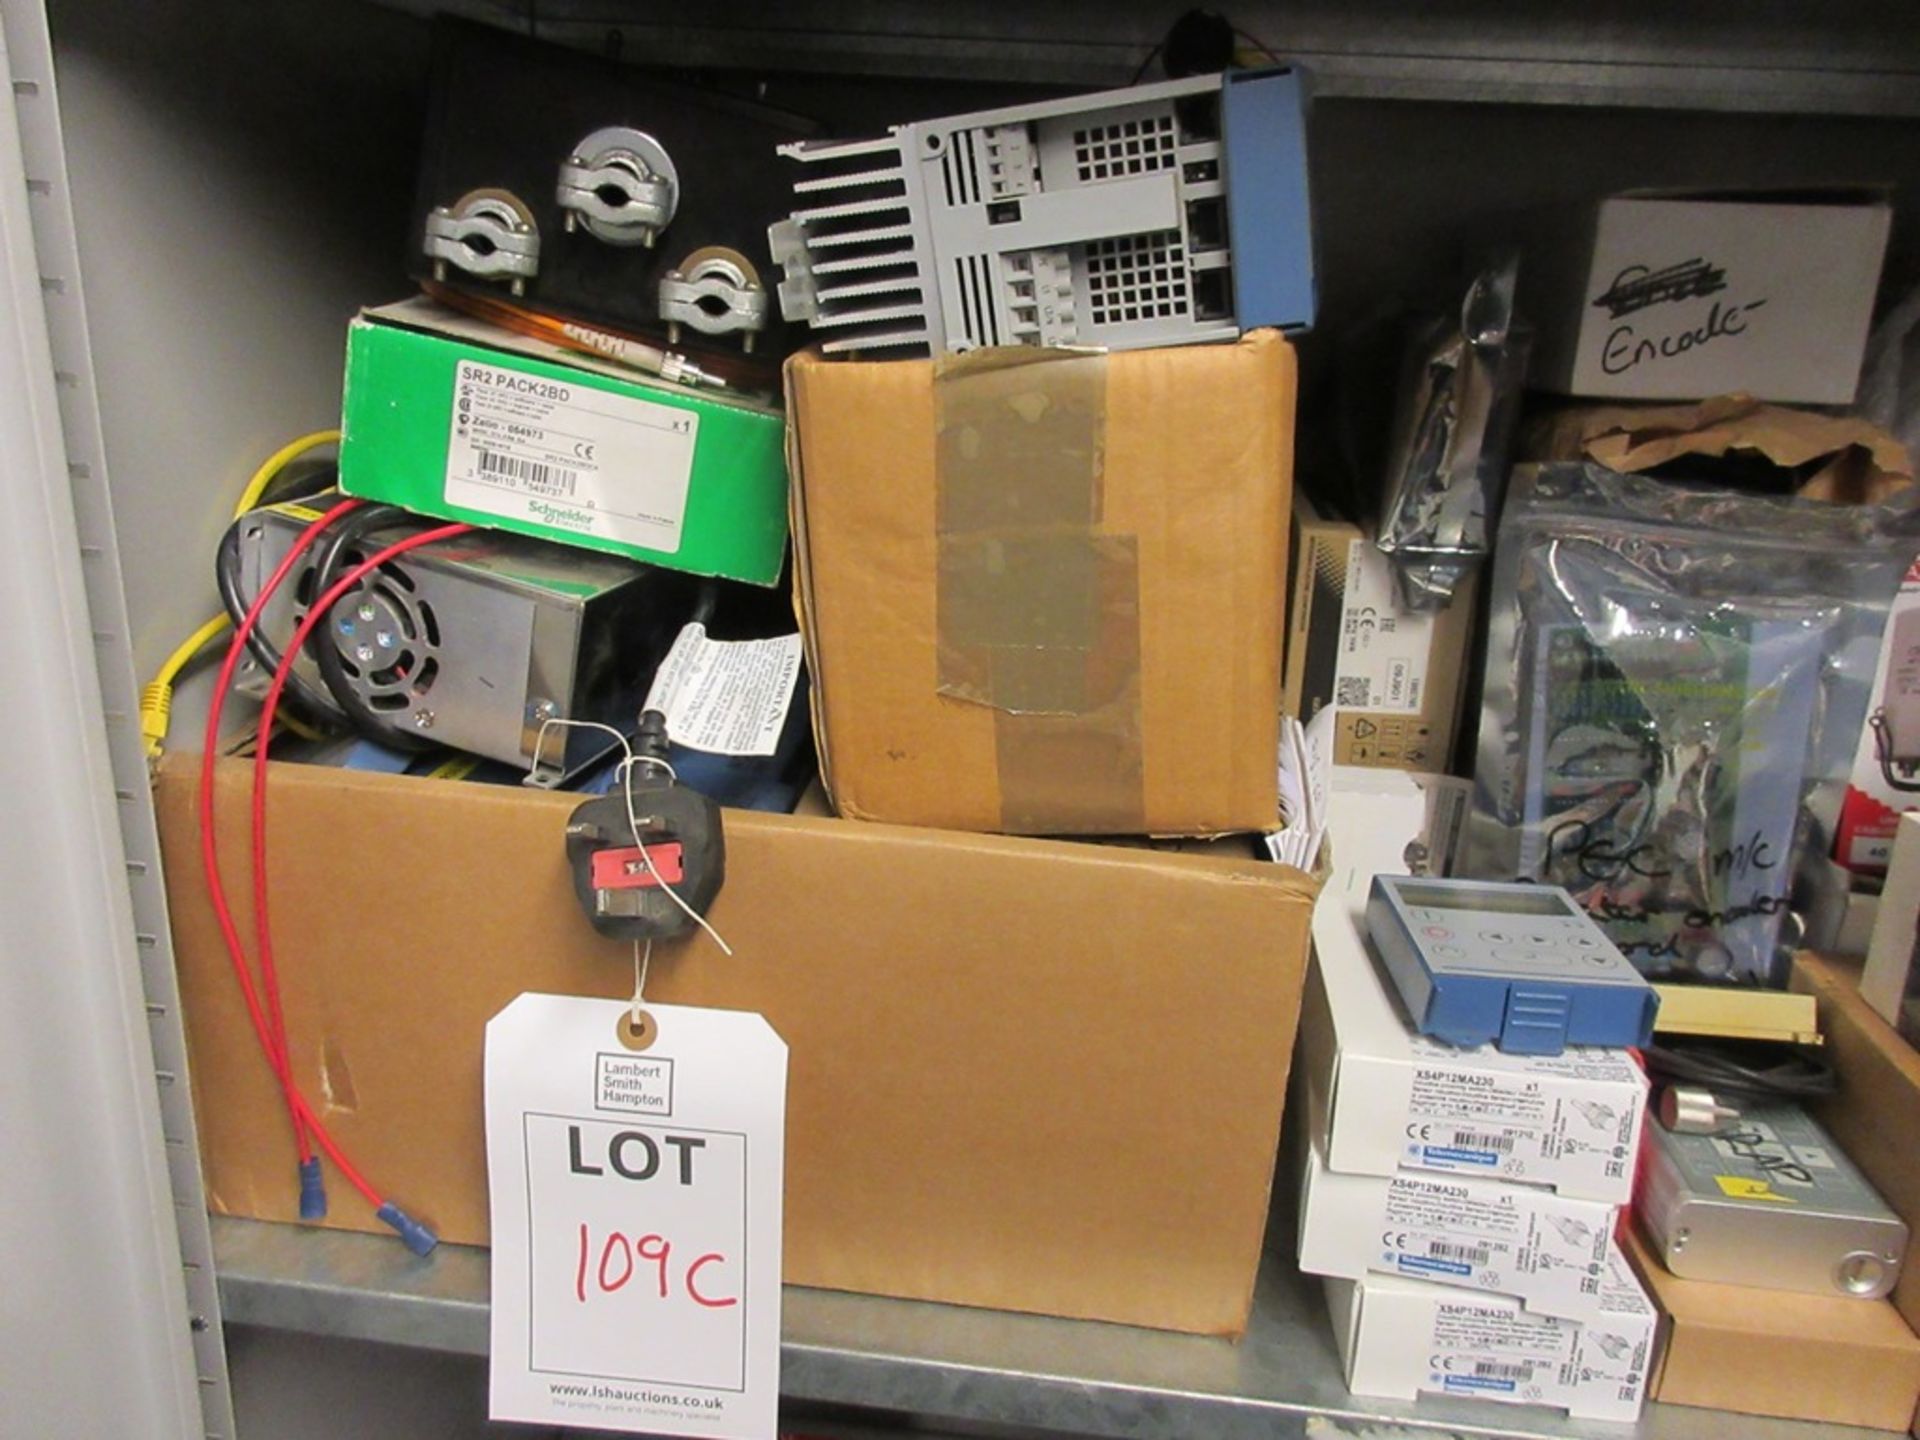 Cupboard and contents including gas regulators, power supply units, electrode connectors, janes, - Image 3 of 9